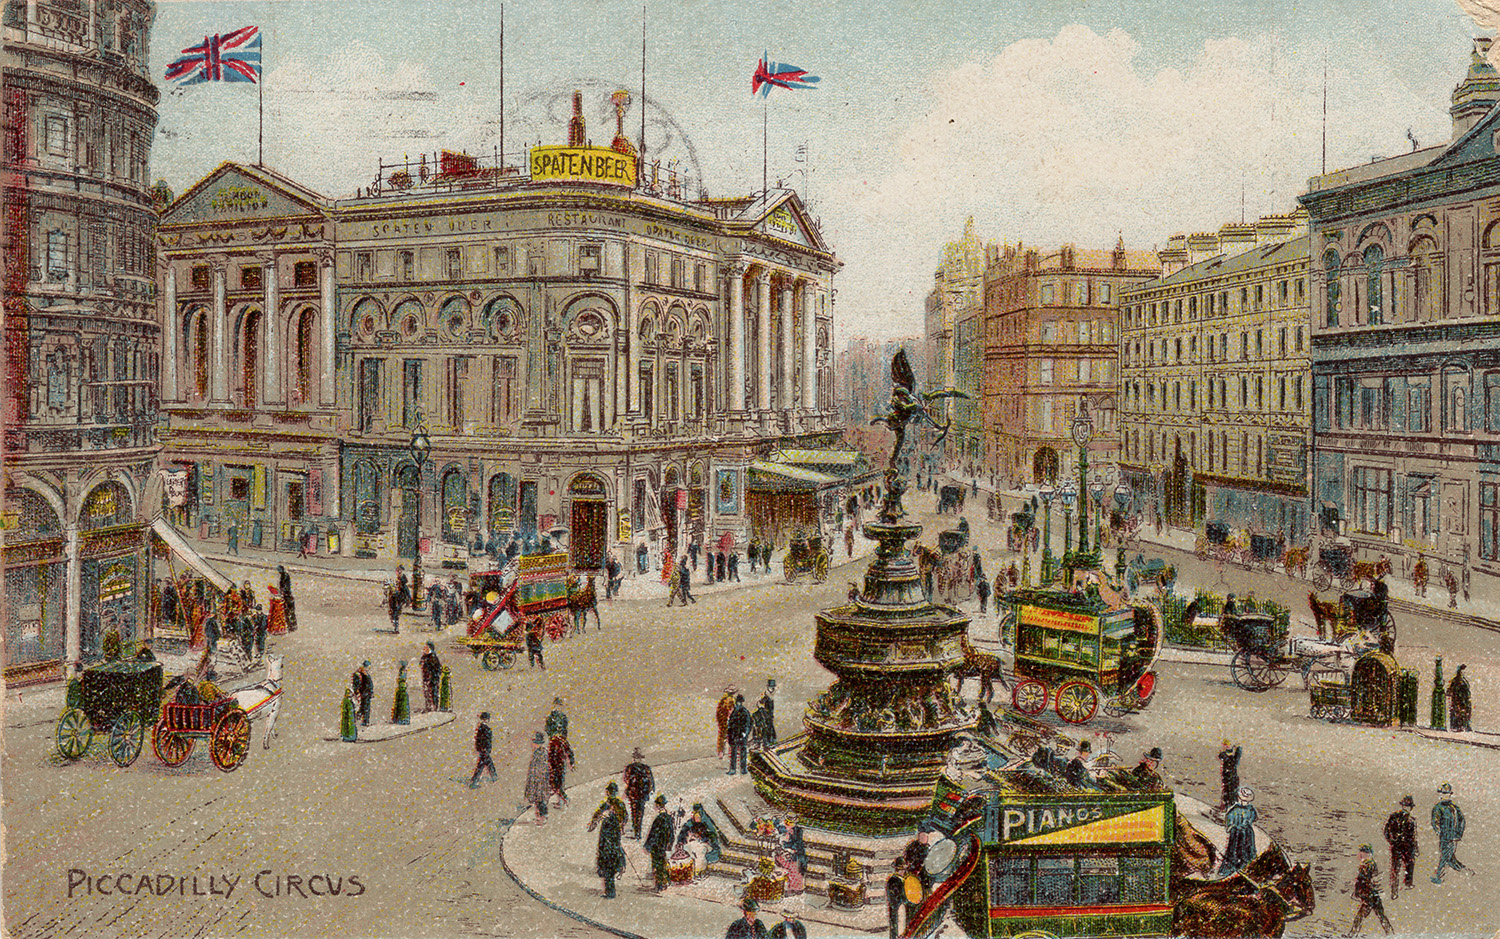 Piccadilly Circus, author's collection. 